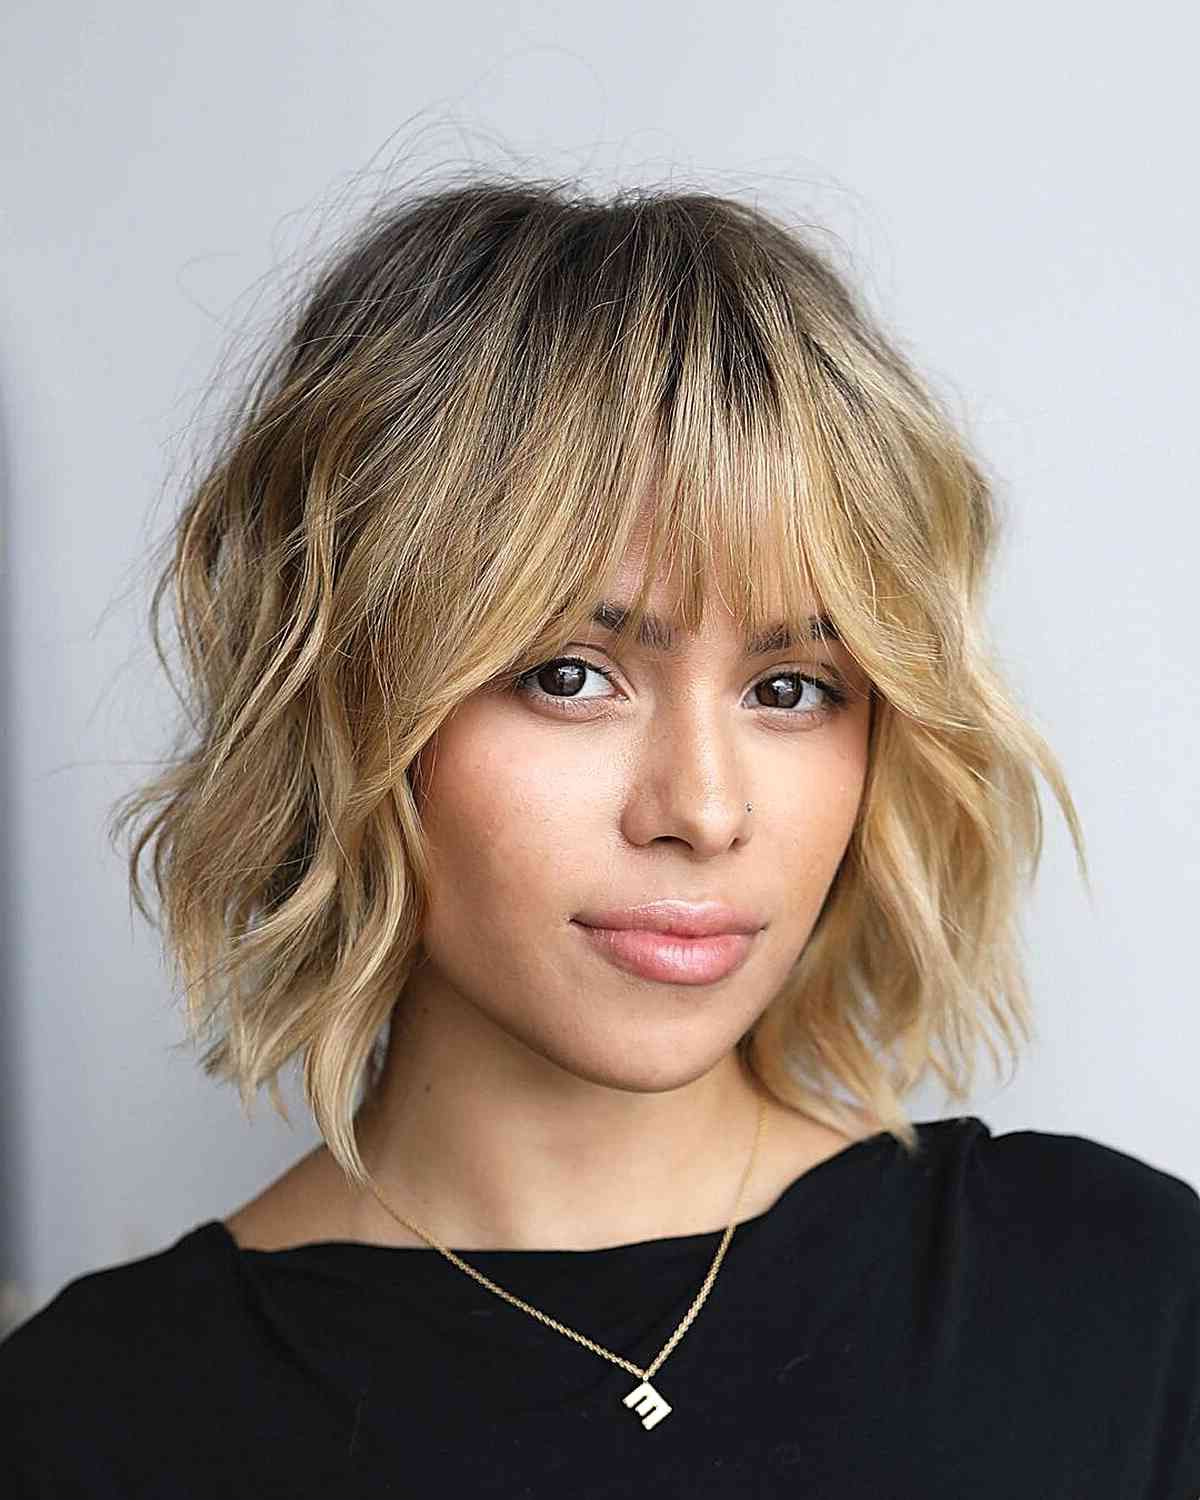 24 Volumizing Bobs With Bangs Women With Fine, Thin Hair Need To See Throughout Shaggy Bob Haircut With Bangs (View 17 of 25)